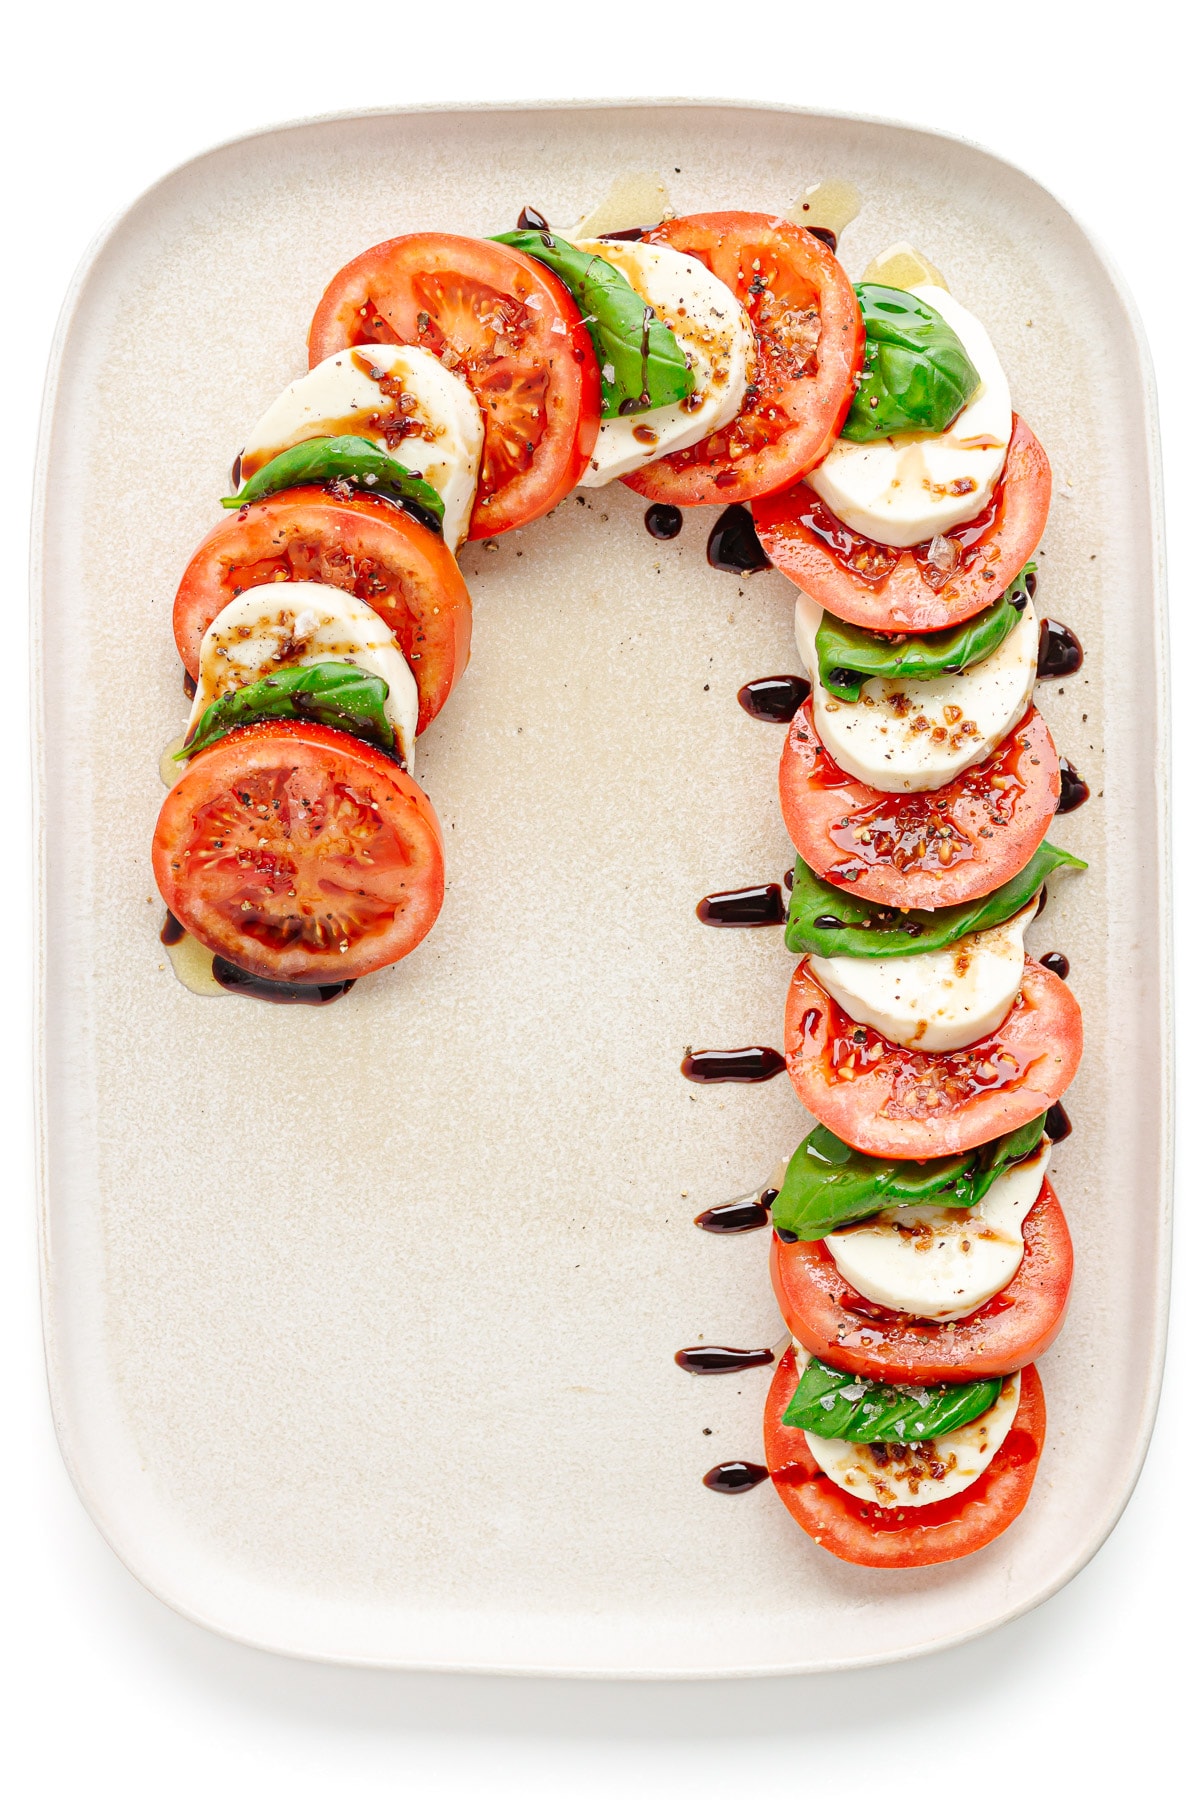 A Christmas caprese salad arranged in the shape of a candy cane on a cream colored rectangular serving platter.